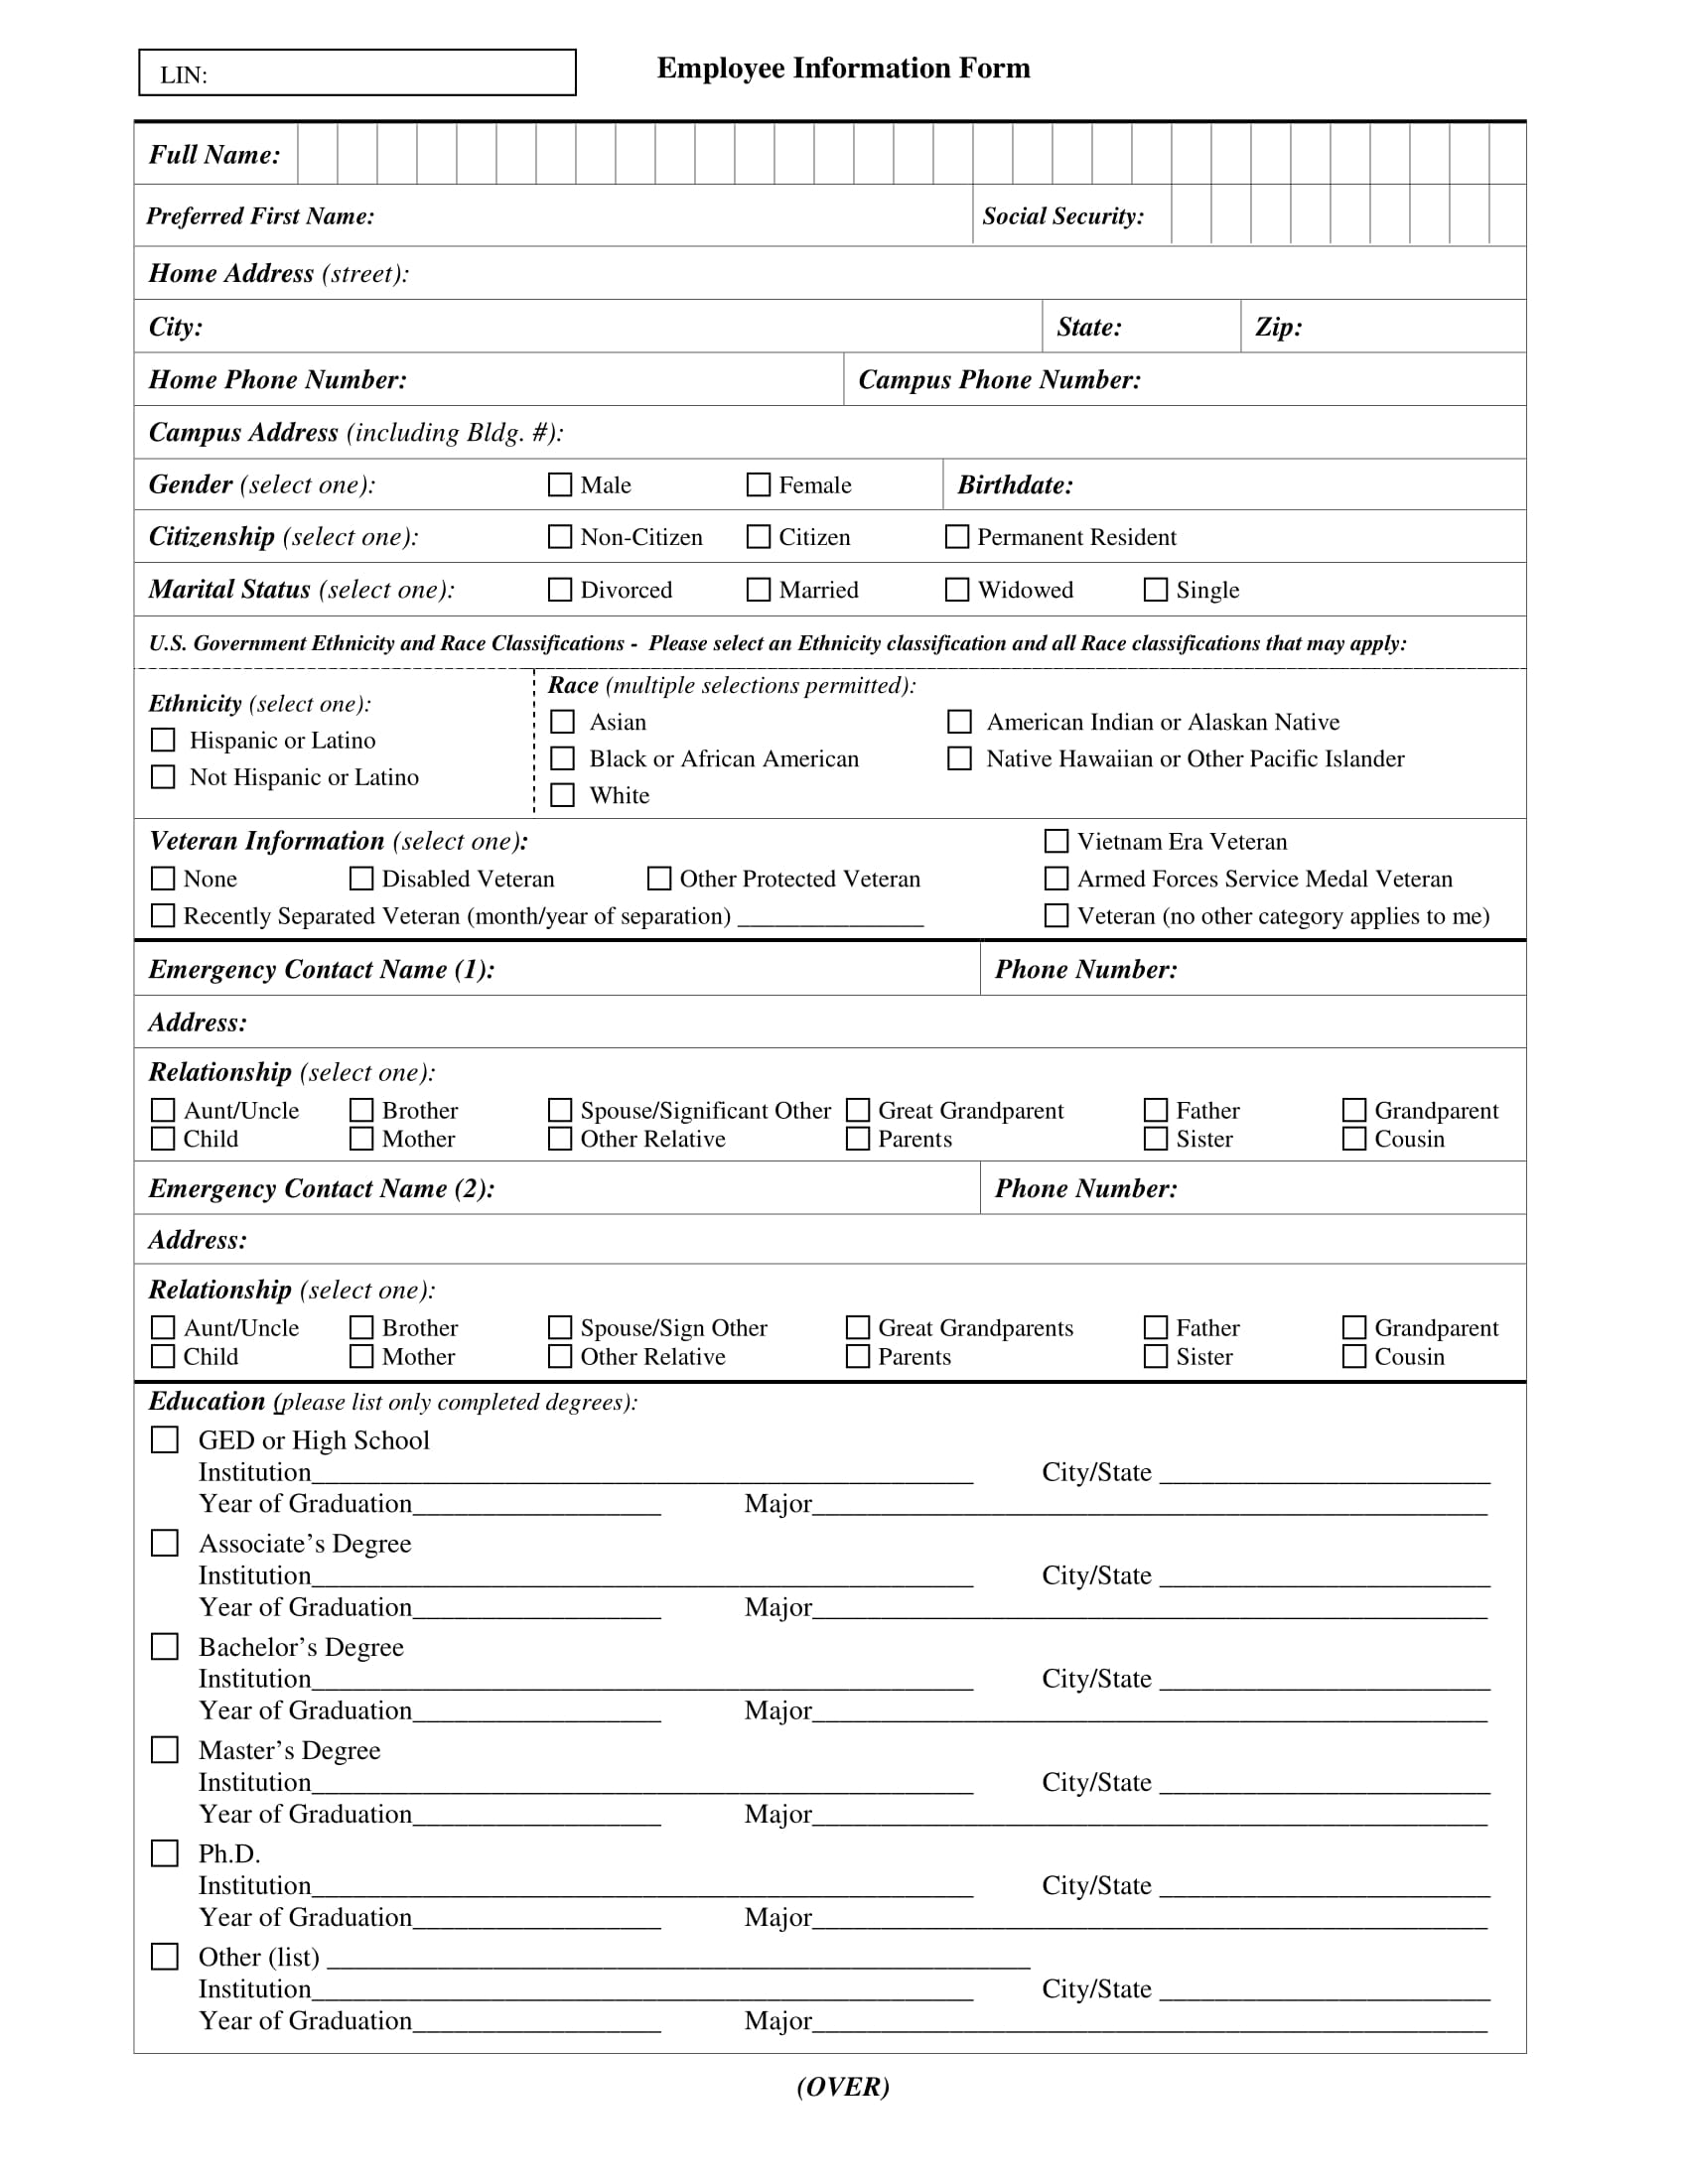 FREE 13+ Employee Information Forms in MS Word PDF